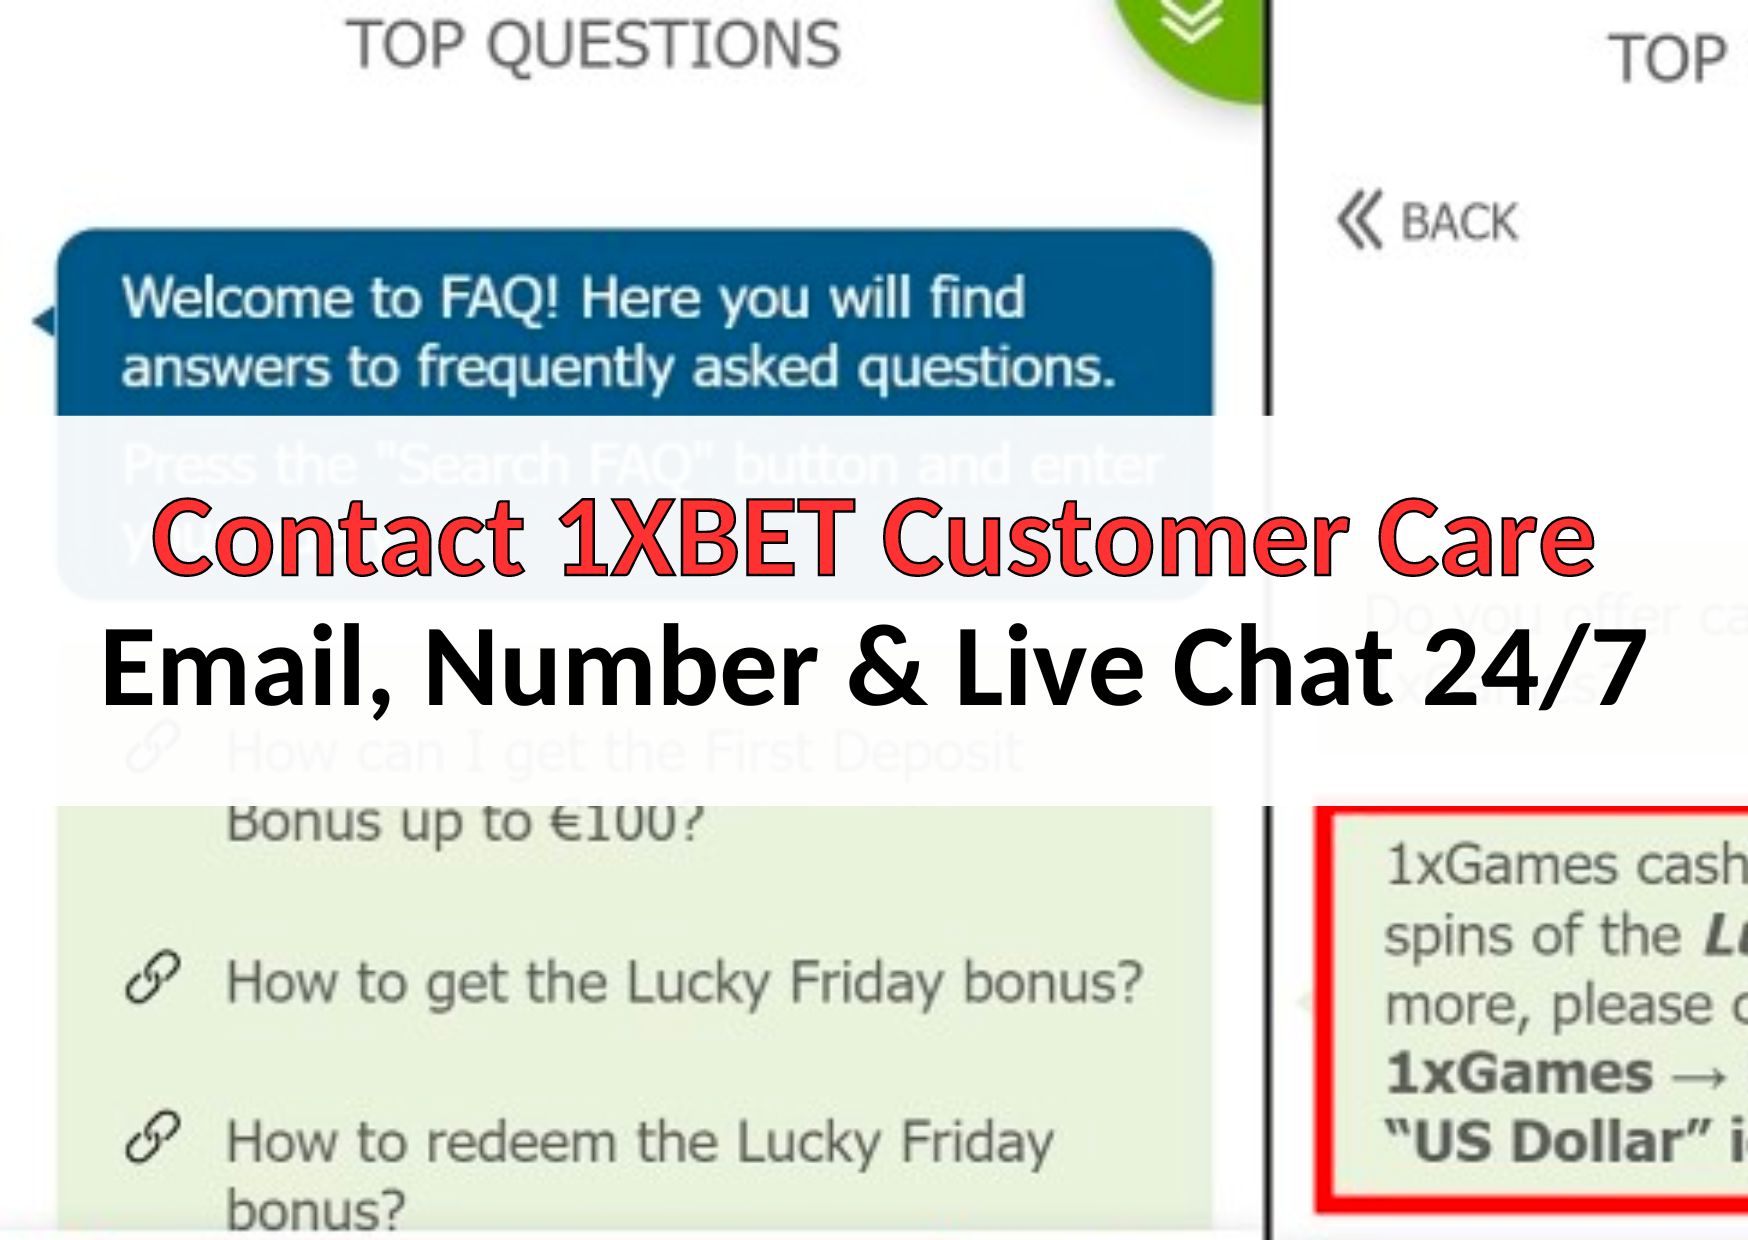 Contact 1XBET Customer Care - Email, Number & Live Chat 24/7